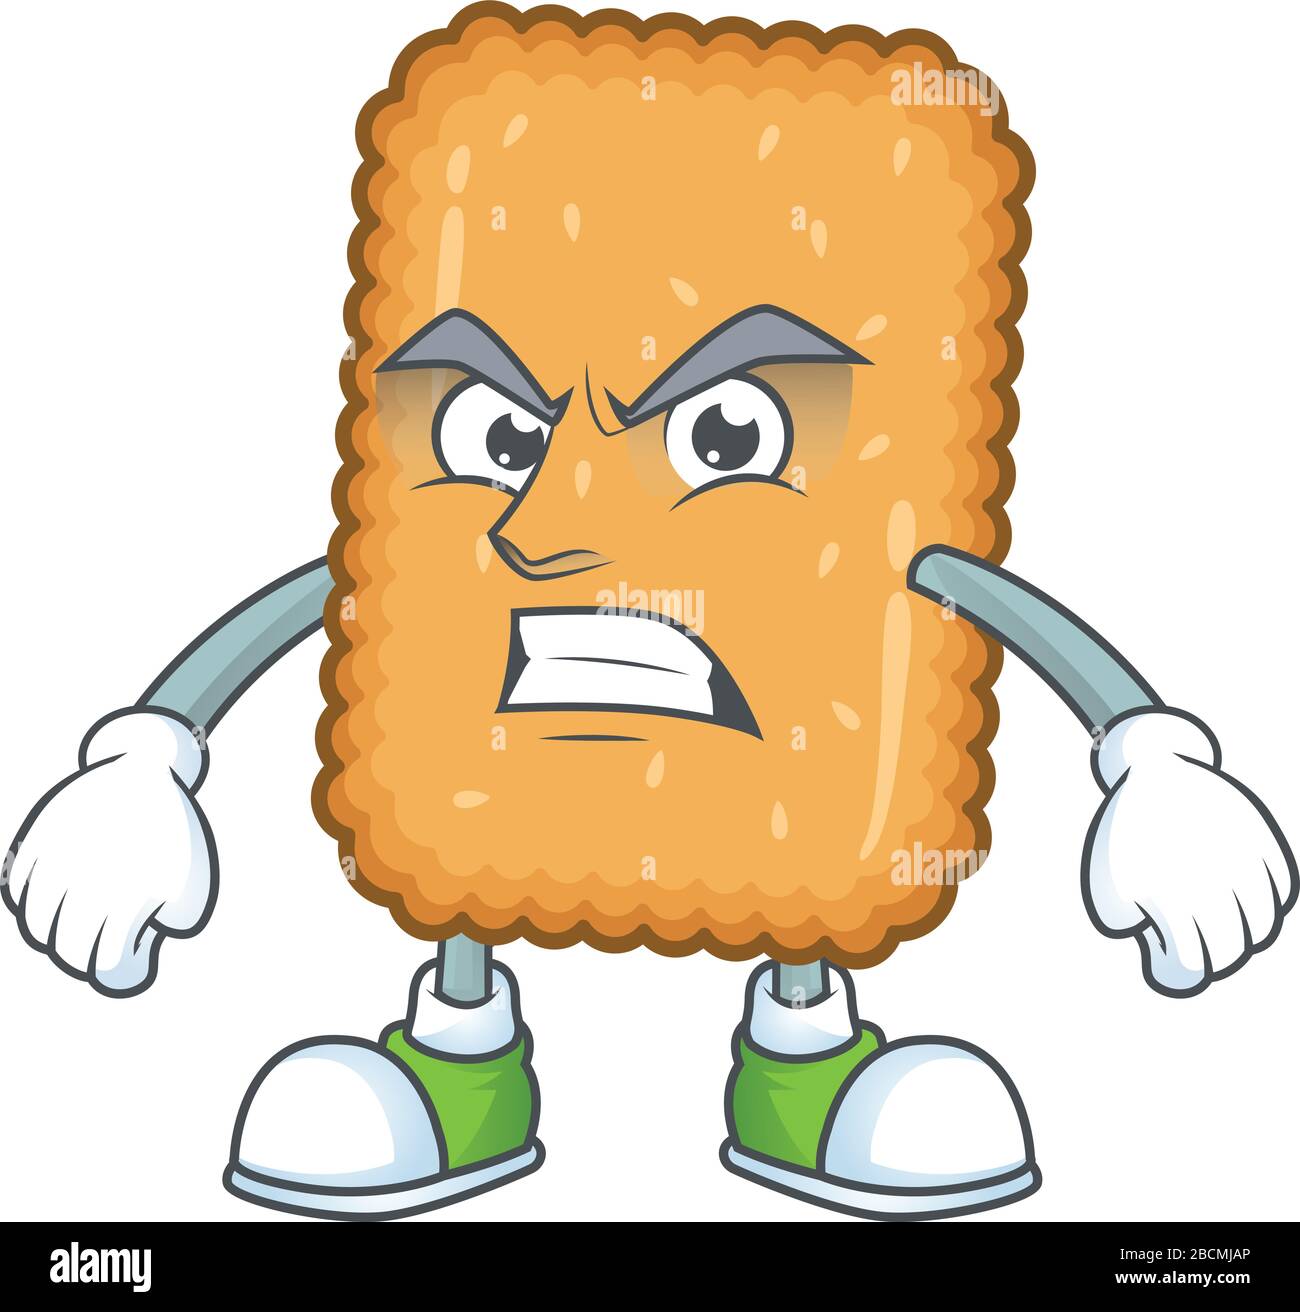 Mascot design style of biscuit with angry face Stock Vector